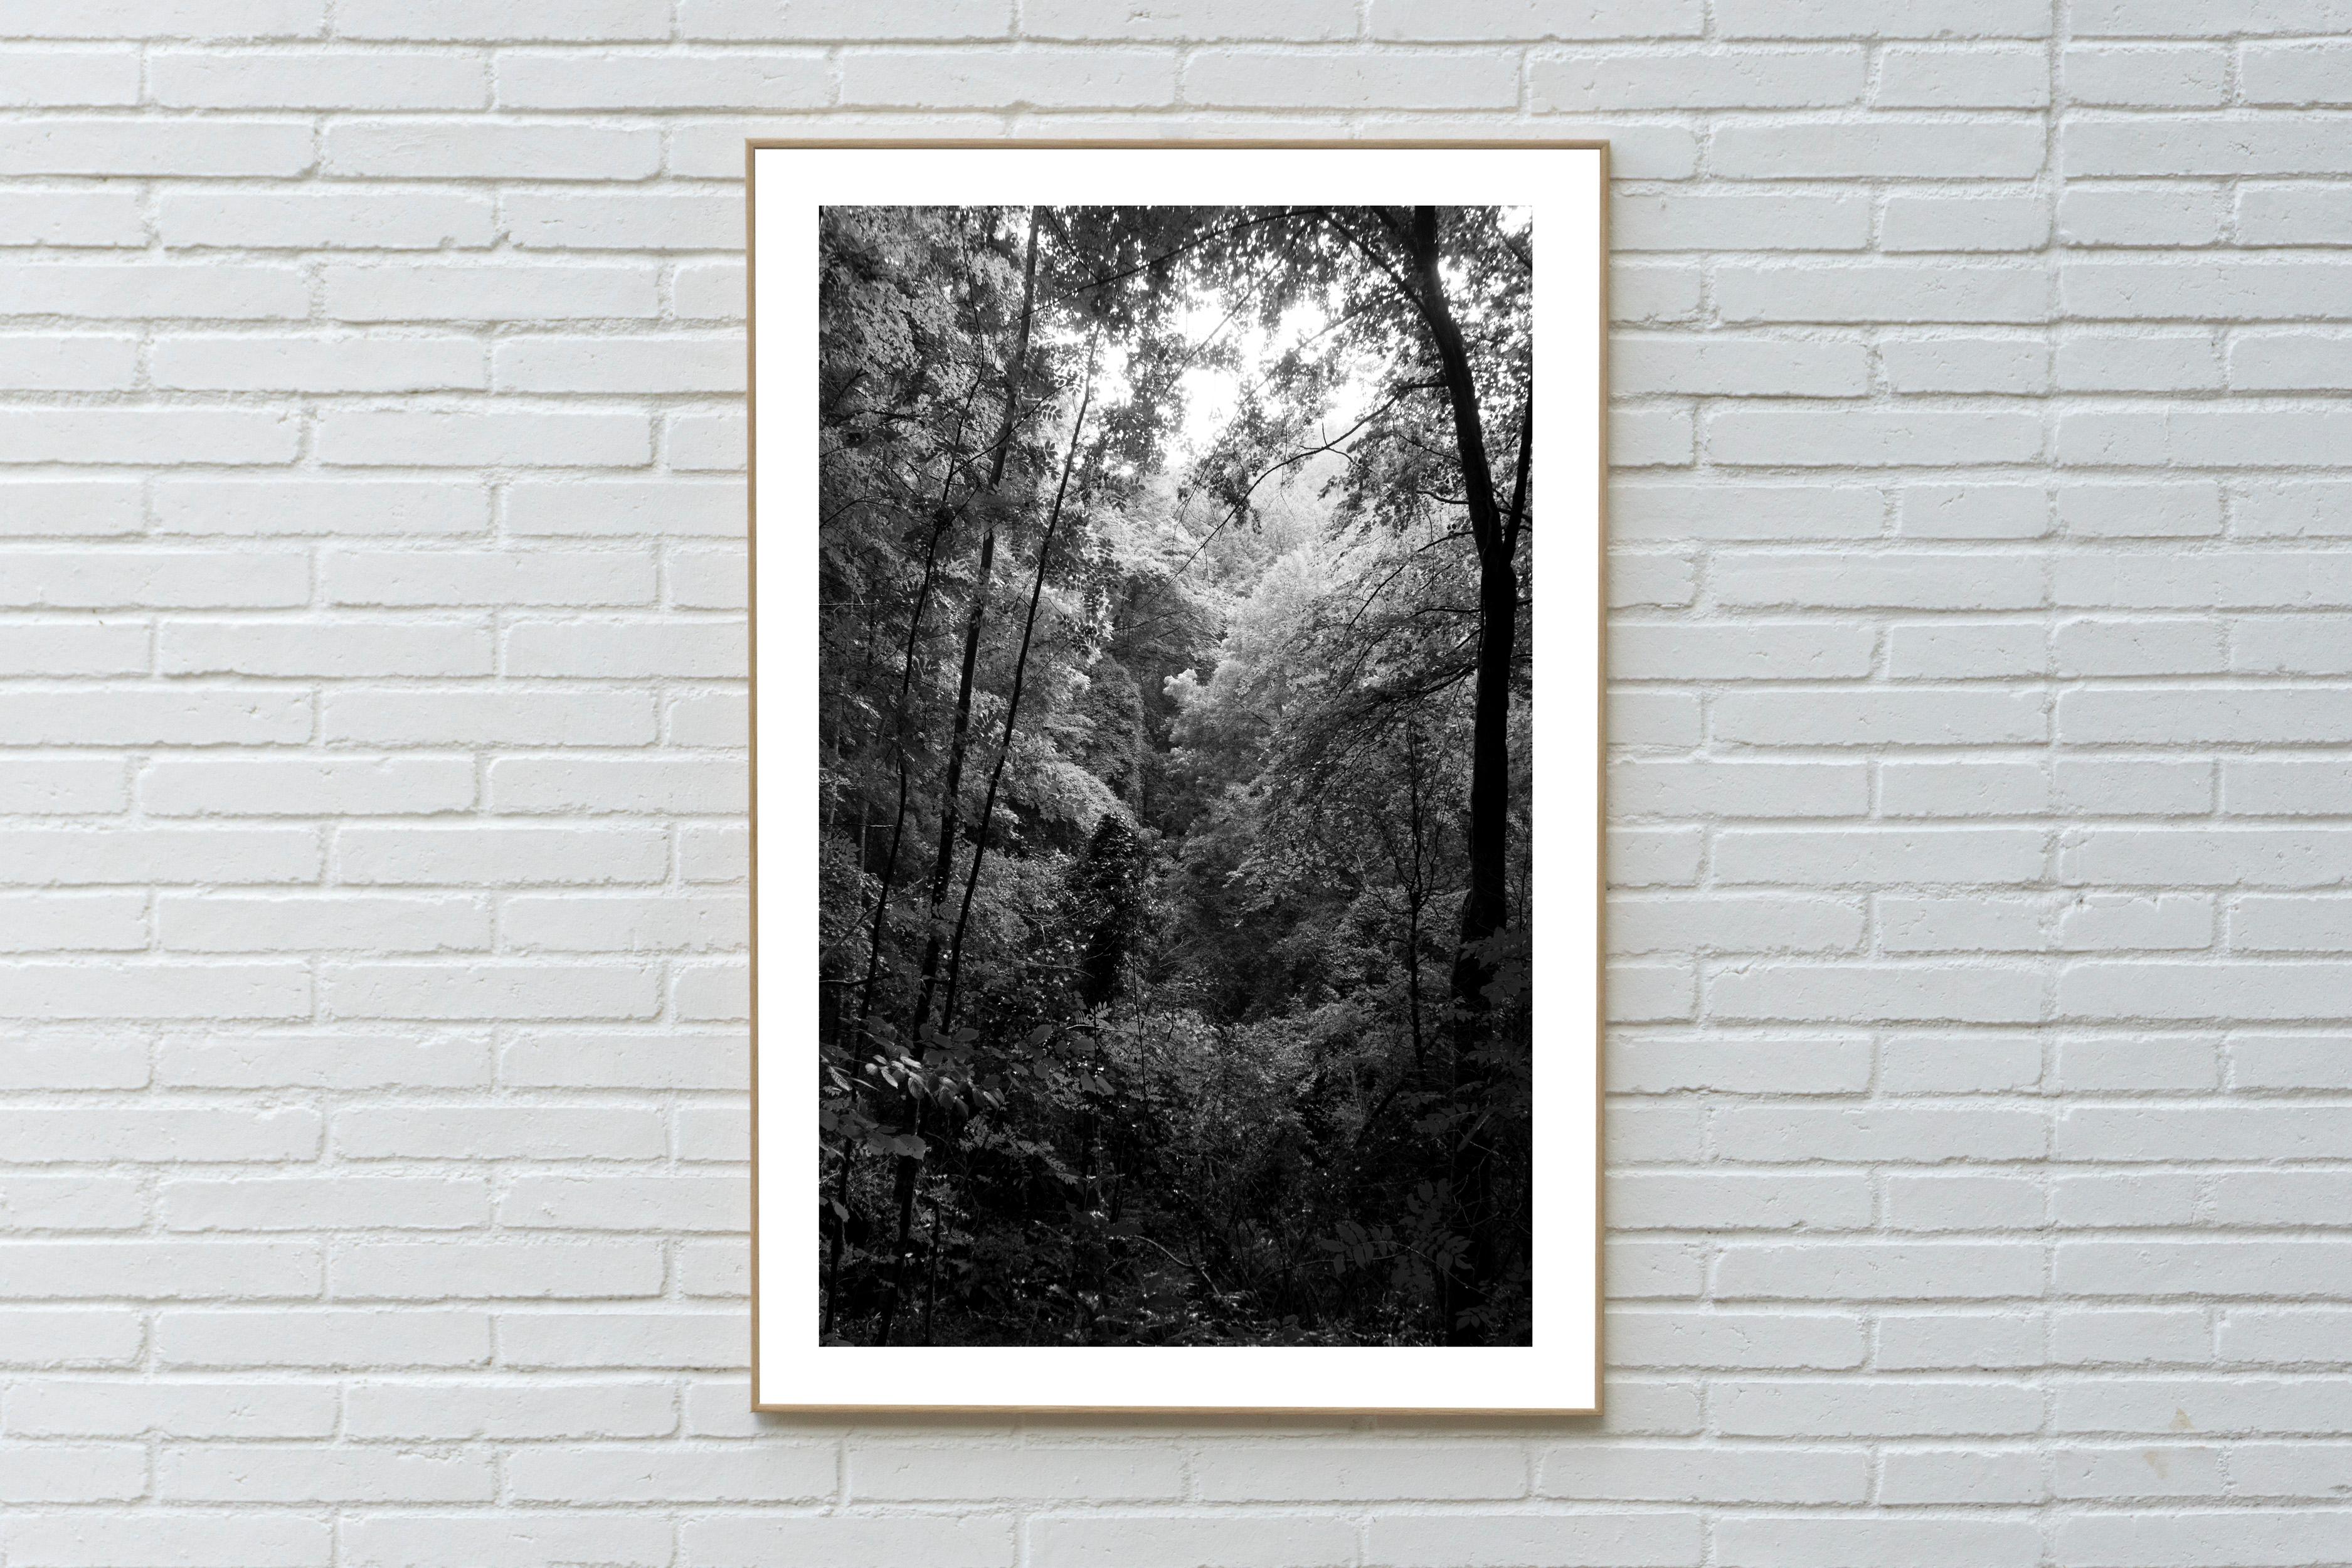 Late Afternoon Forest Light,  Black & White Landscape Limited Giiclée Print  - Photograph by Kind of Cyan